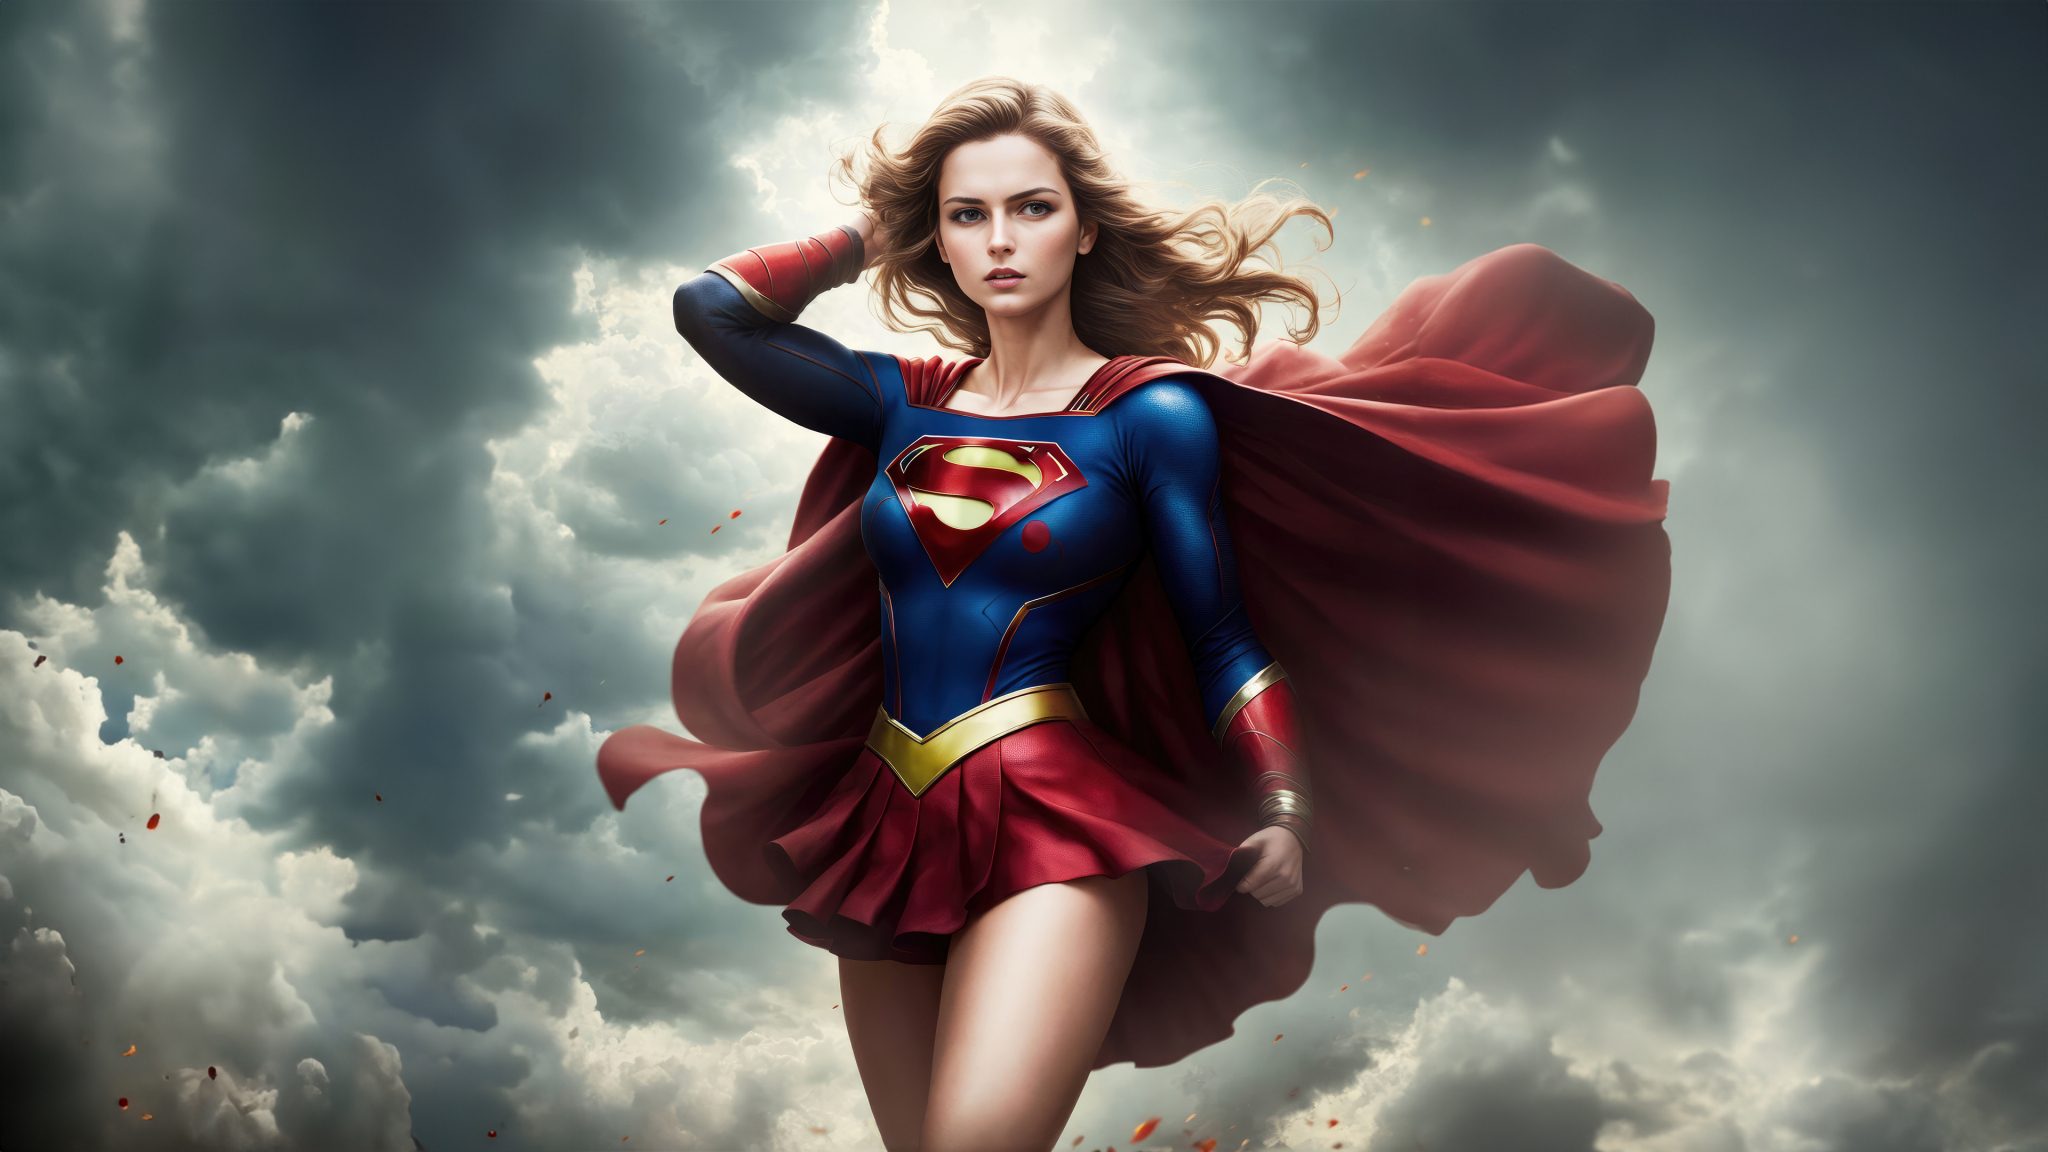 Download Wallpaper 2048x1152 Hot Supergirl 2023 Dual Wide 2048x1152 Hd Background 29544 8822